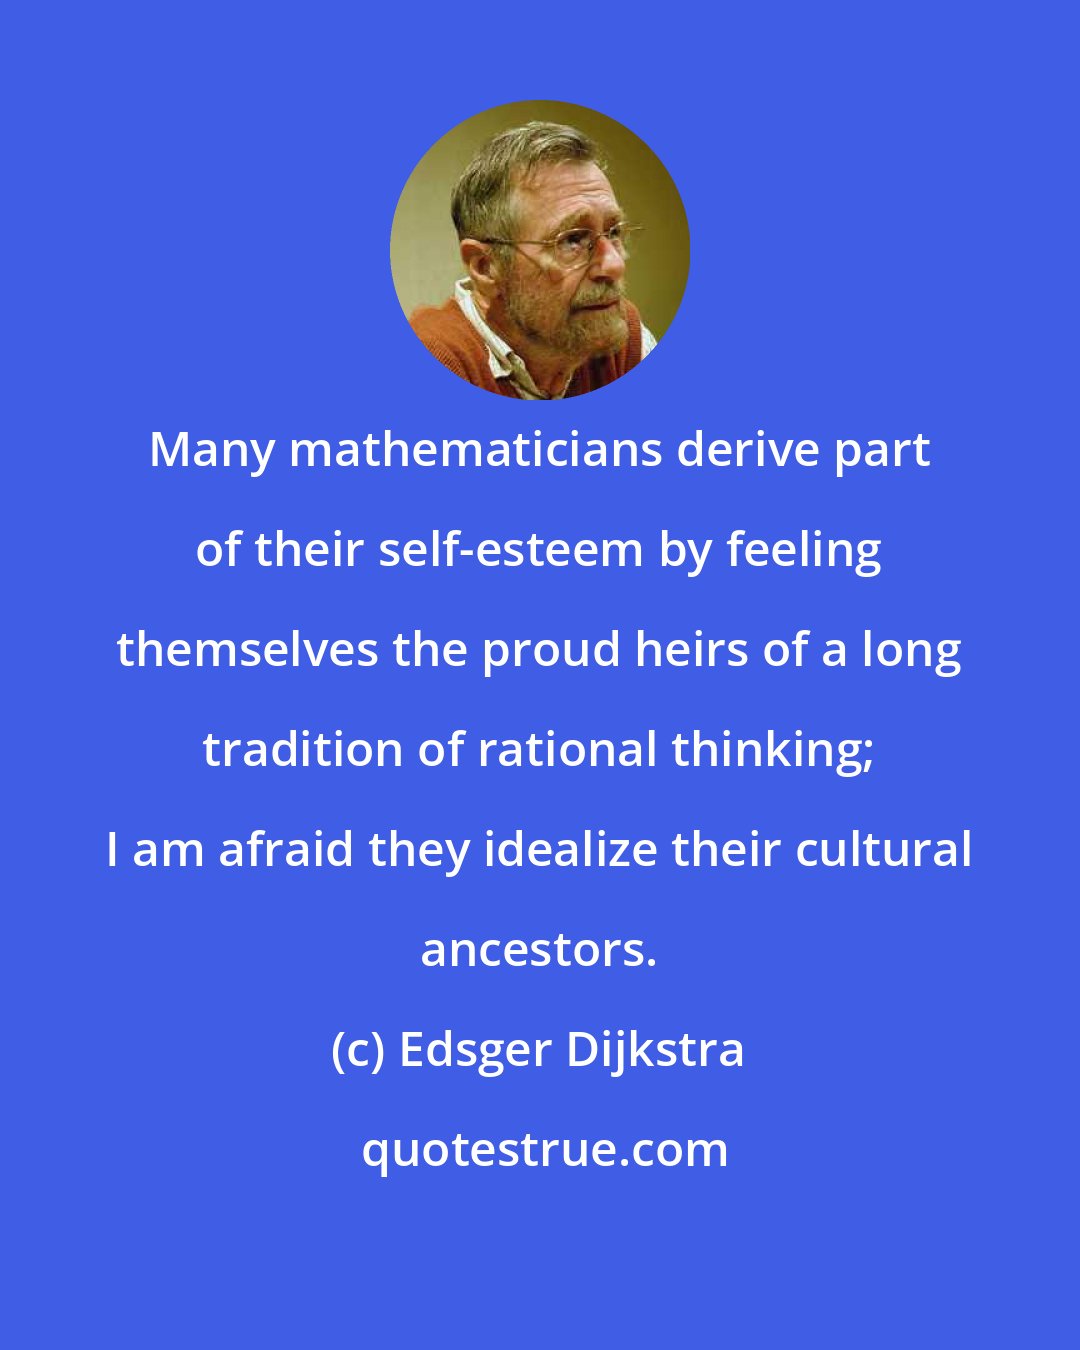 Edsger Dijkstra: Many mathematicians derive part of their self-esteem by feeling themselves the proud heirs of a long tradition of rational thinking; I am afraid they idealize their cultural ancestors.